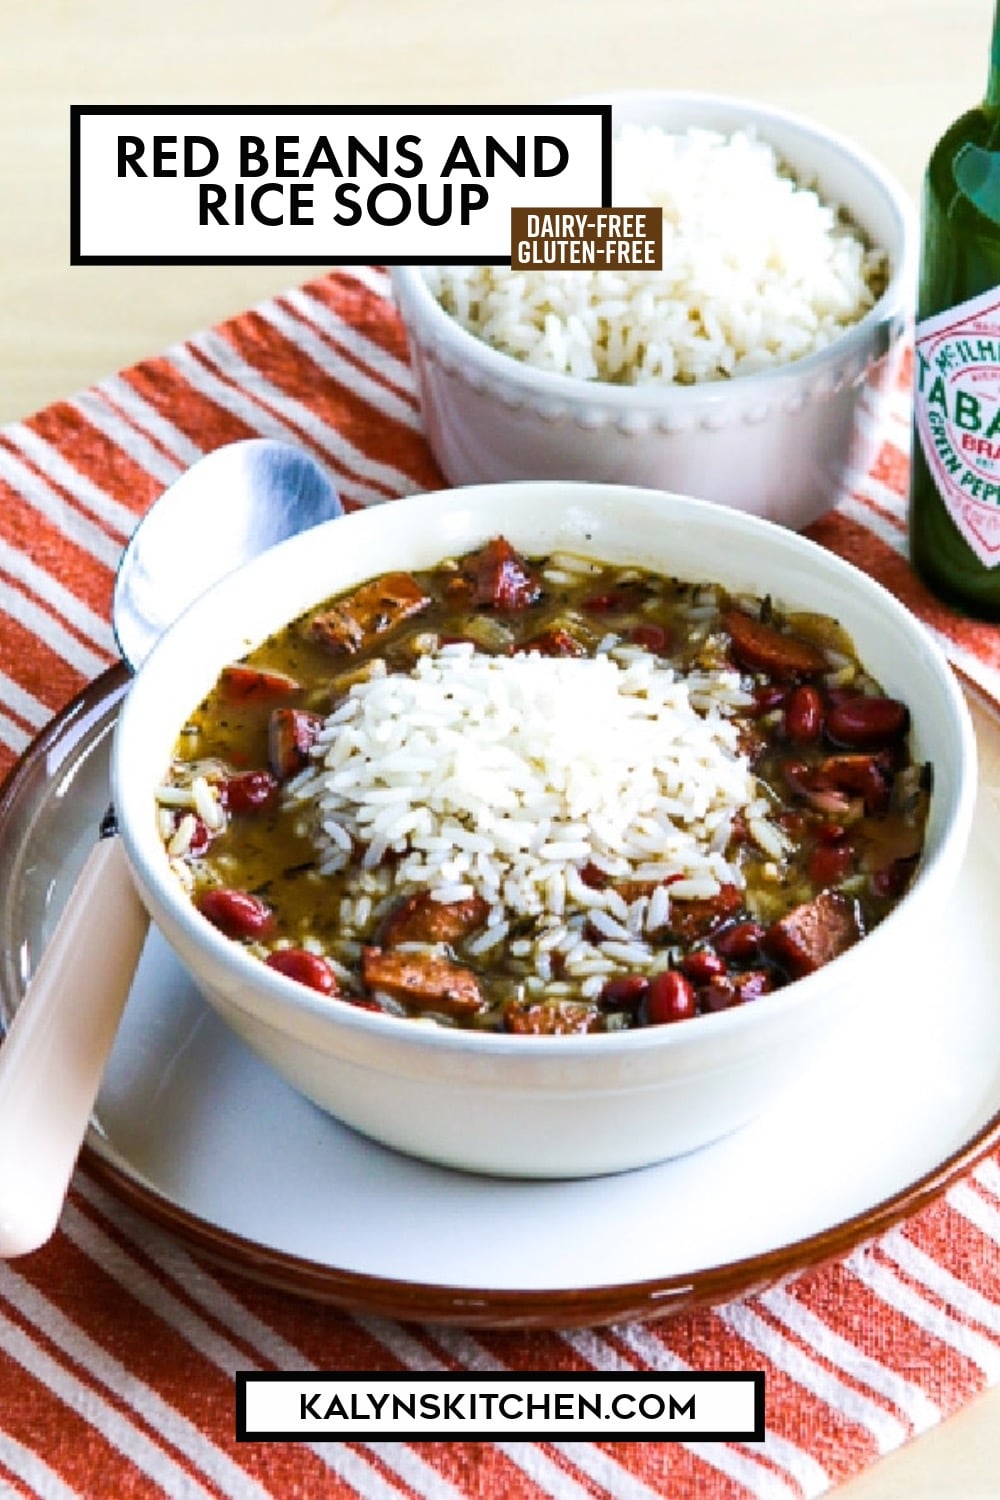 Pinterest image of Red Beans and Rice Soup